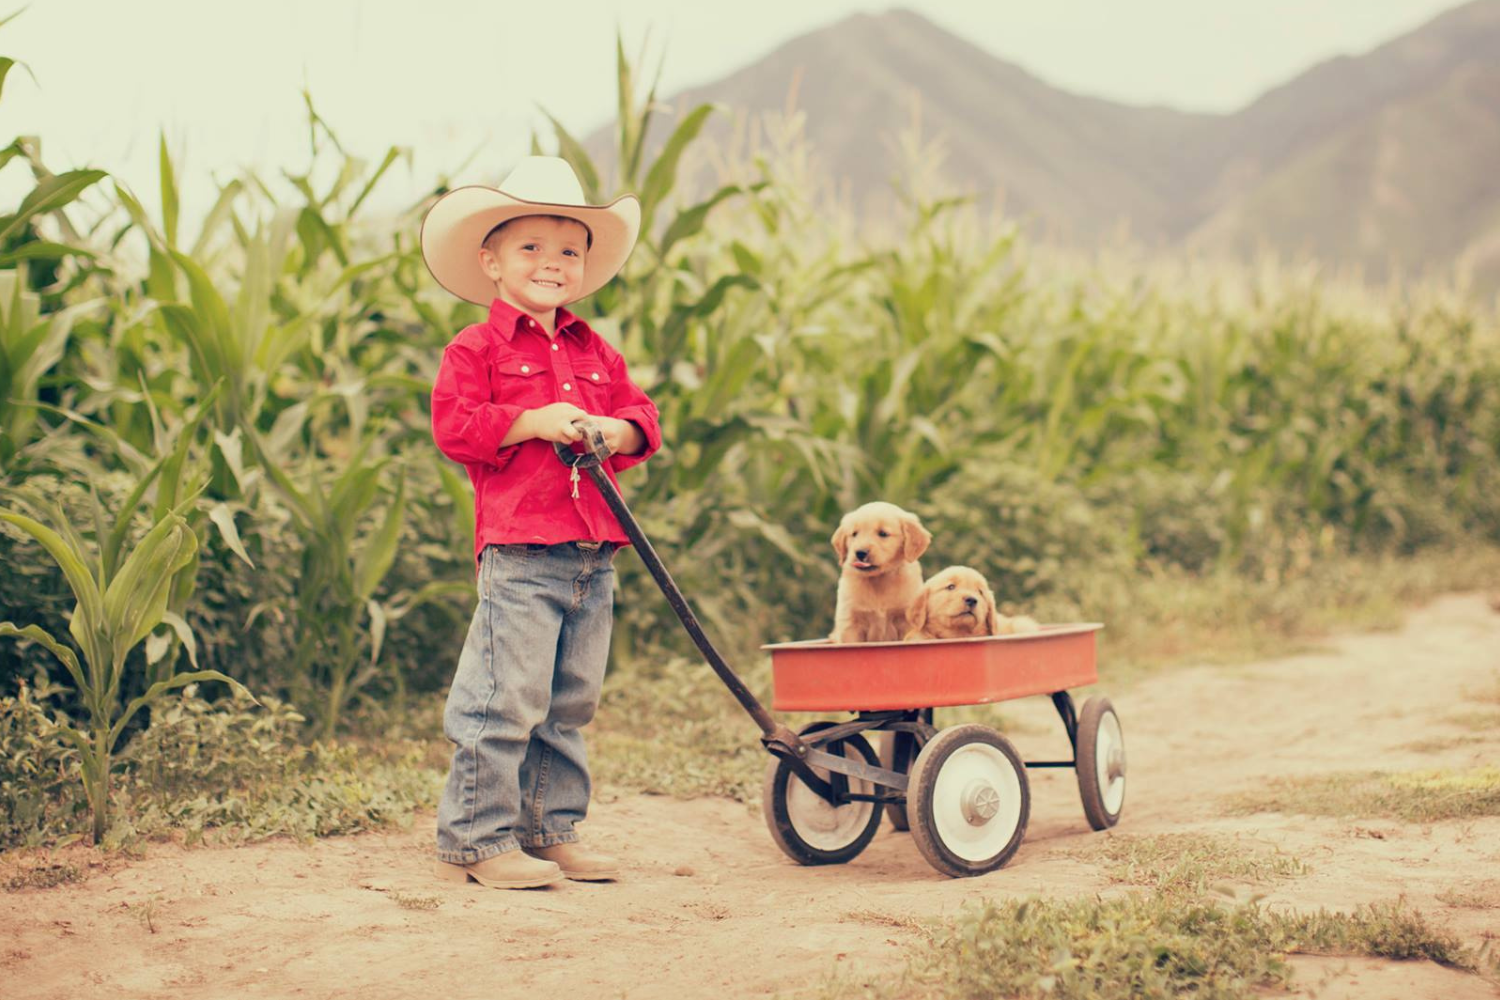 Young boy wearing a red shirt and cowboy hat with two dogs in a orange wagon outside in a corn field